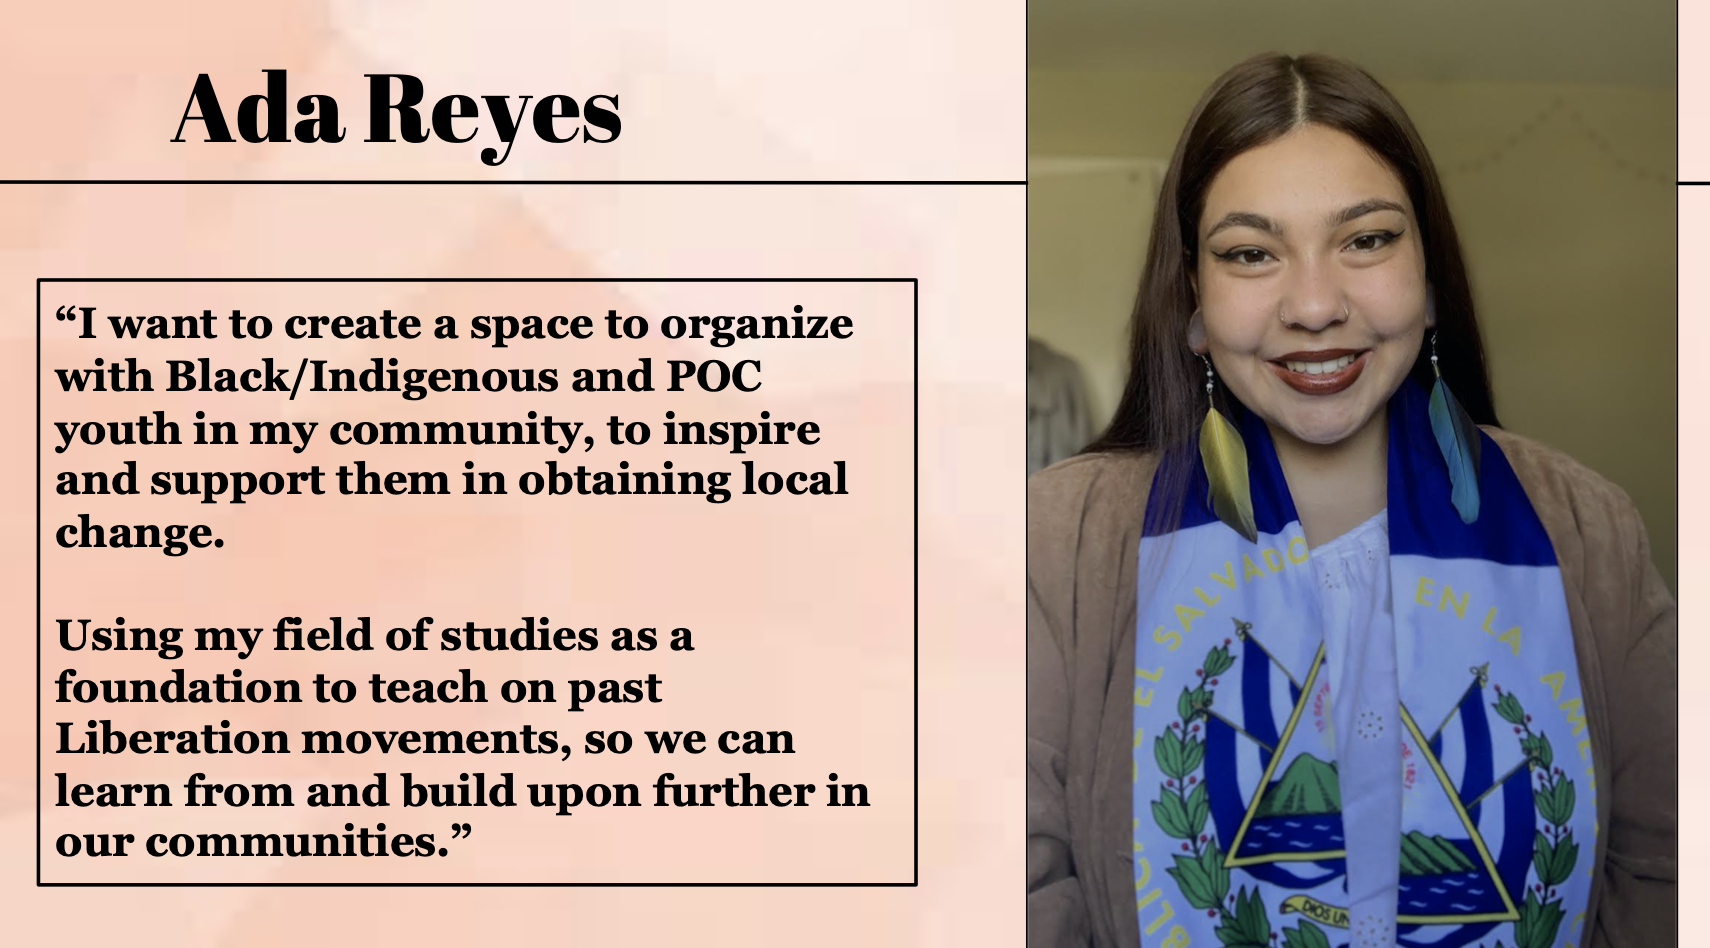 Ada Reyes is using her field of studies as a foundation to teach on past Liberation movements, so we can learn from and build upon further in our communities.